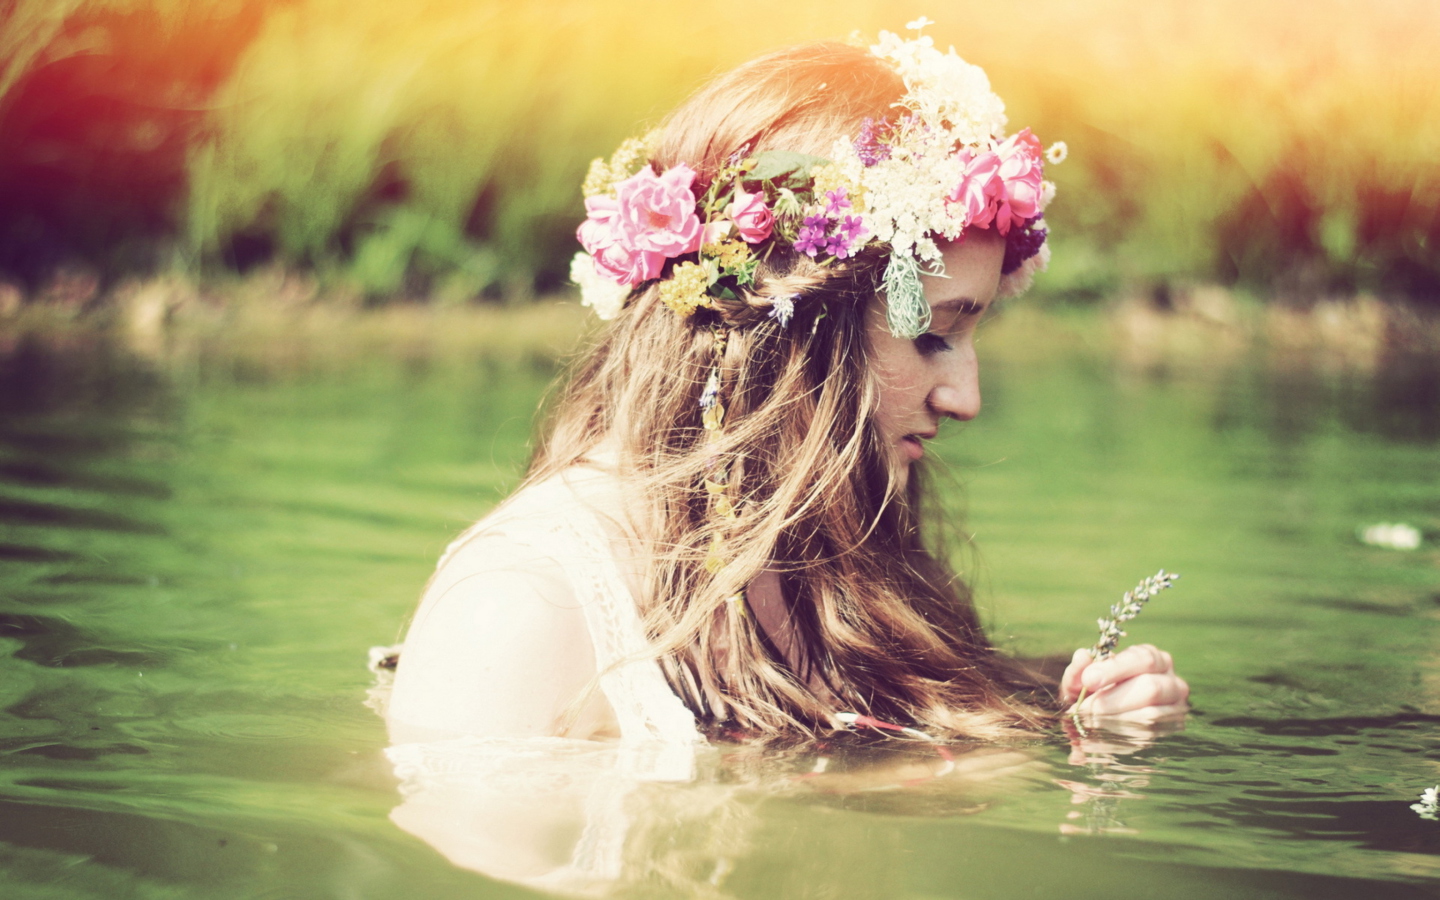 Girl With Flower Crown wallpaper 1440x900